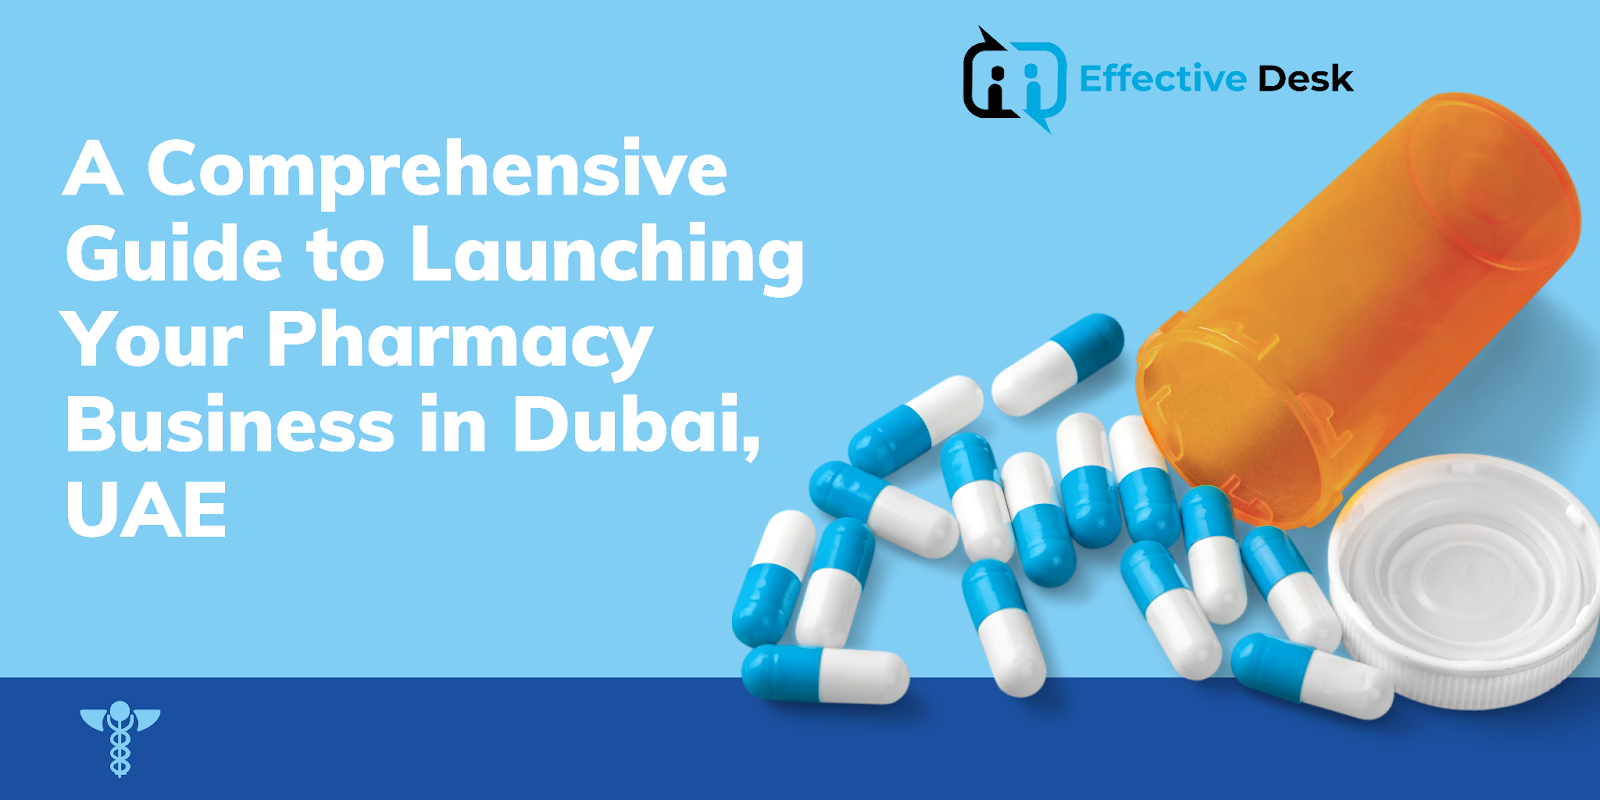 A Comprehensive Guide to Launching Your Pharmacy Business in Dubai, UAE
